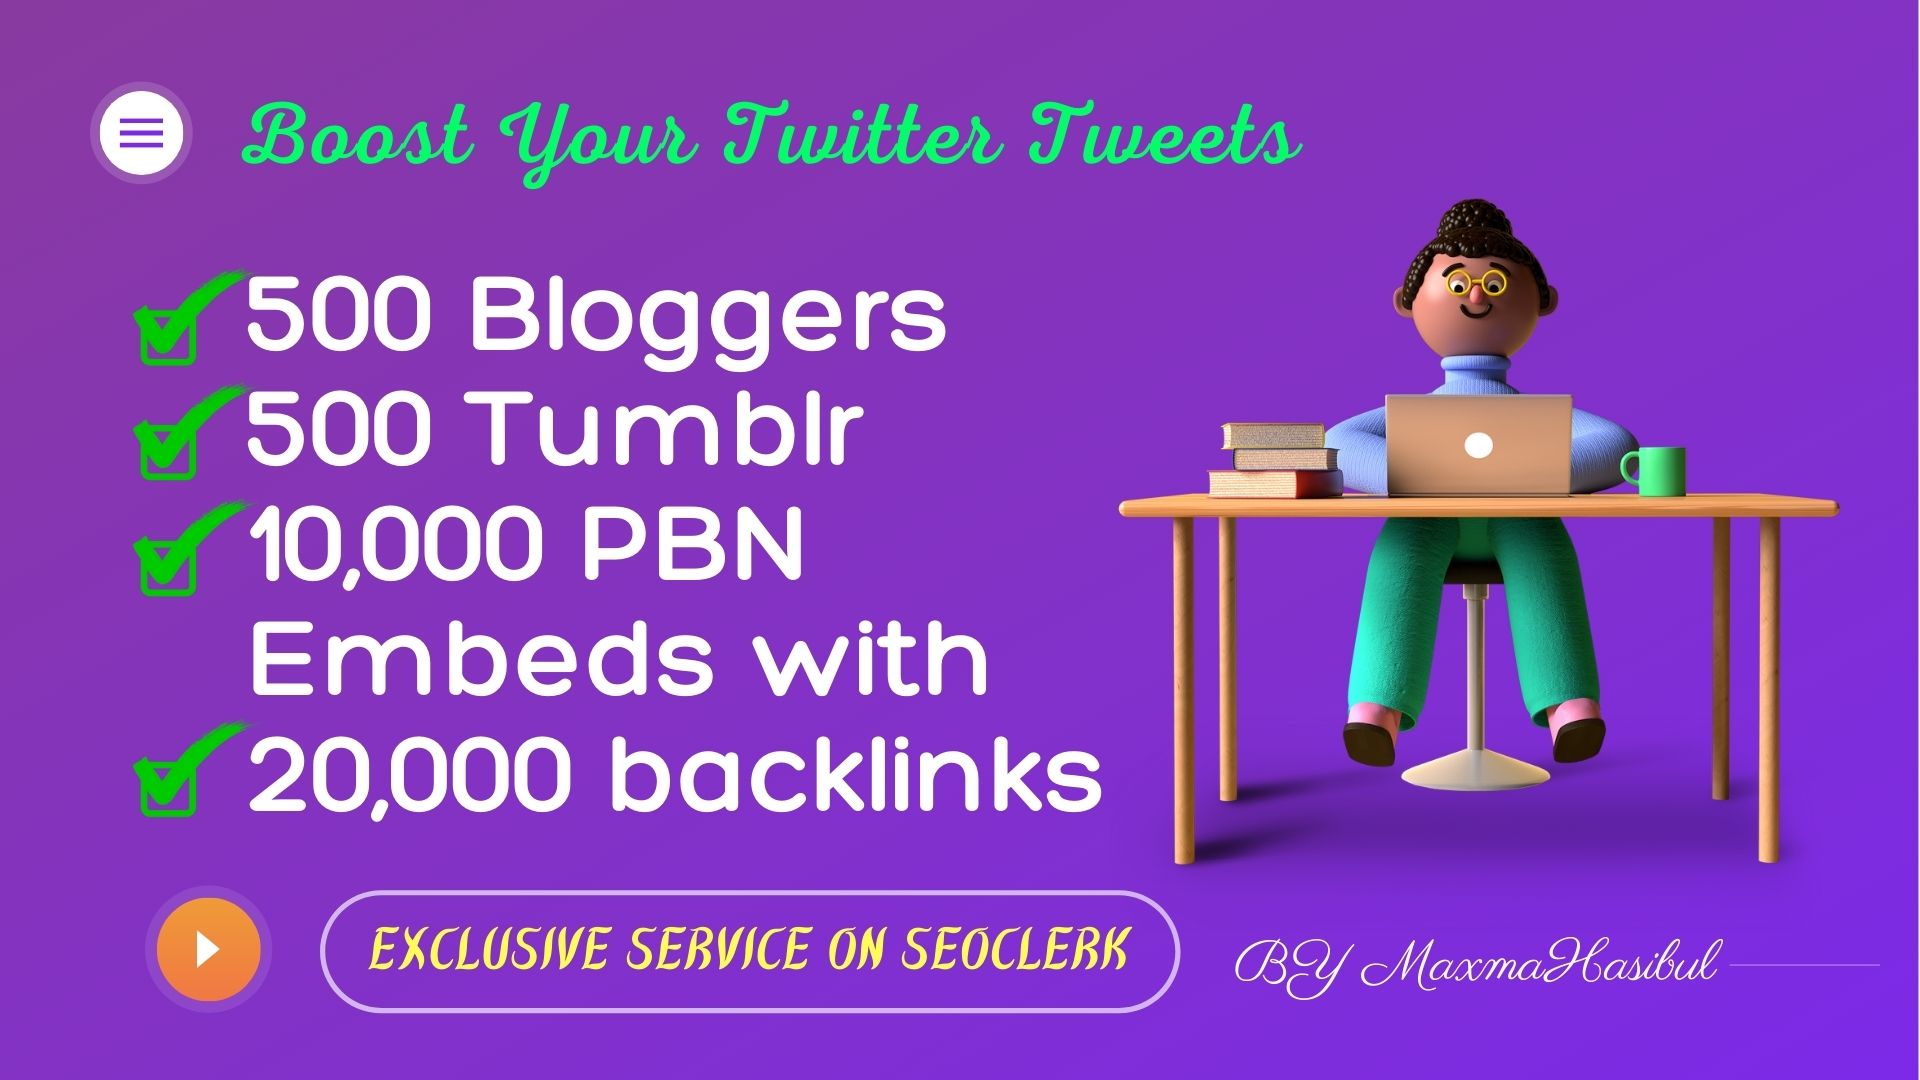 Twitter Tweet Embeds on 500 Blogger, 500 Tumblr, 10,000 PBN Blog Embeds with 20,000 Backlinks